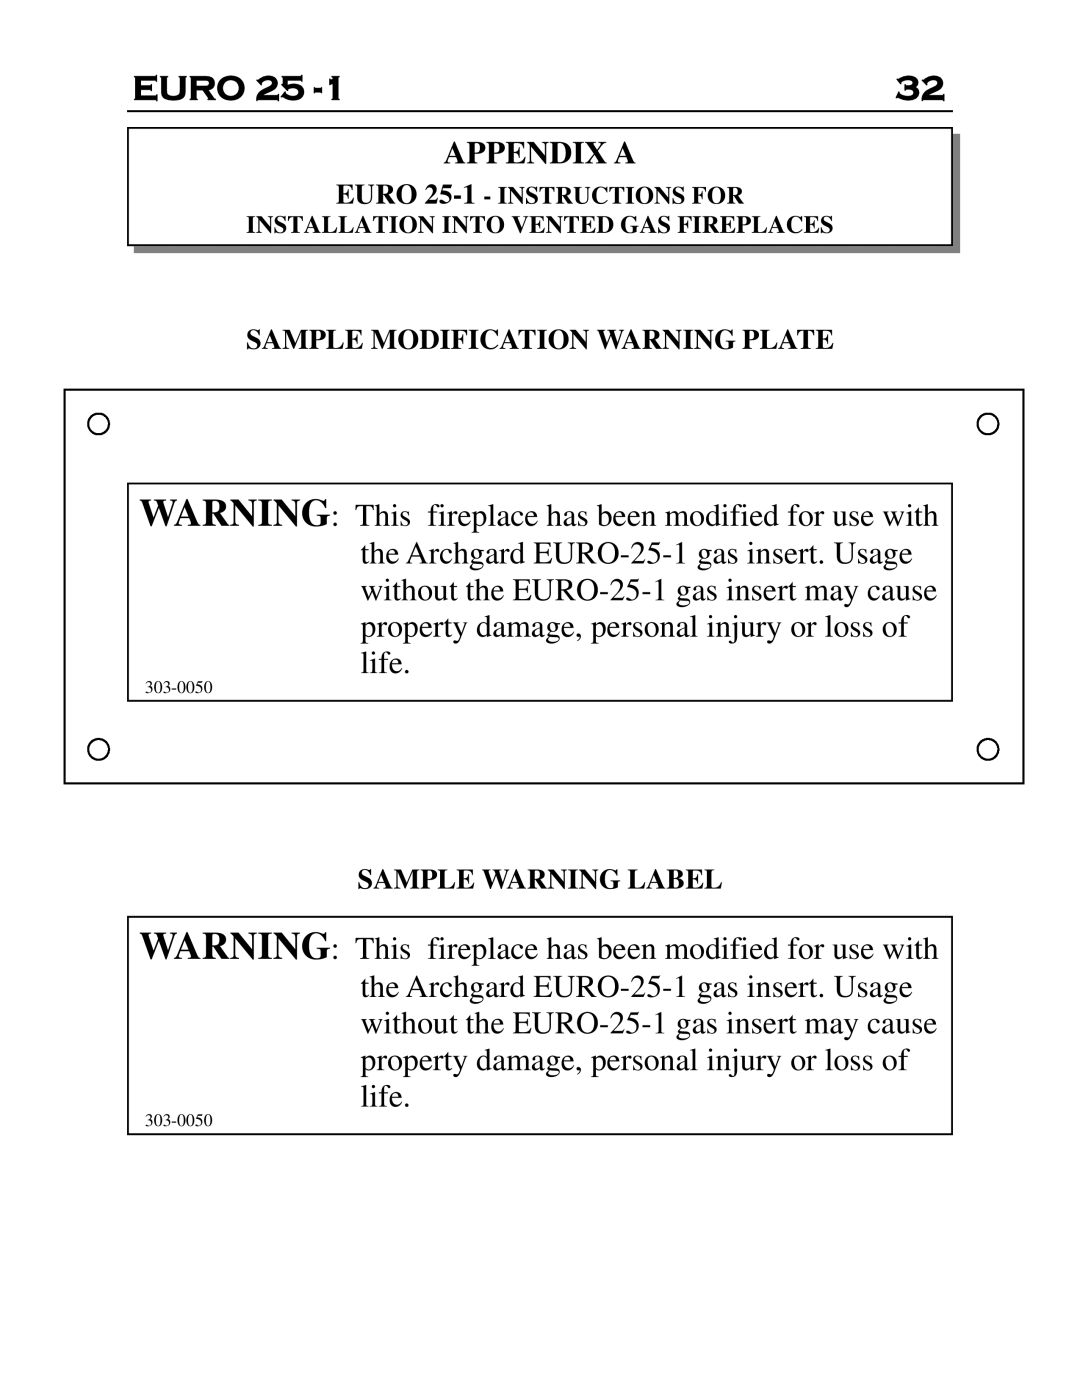 Delkin Devices EI - 25-1 manual Sample Modification Warning Plate, Sample Warning Label, Euro, Appendix A 